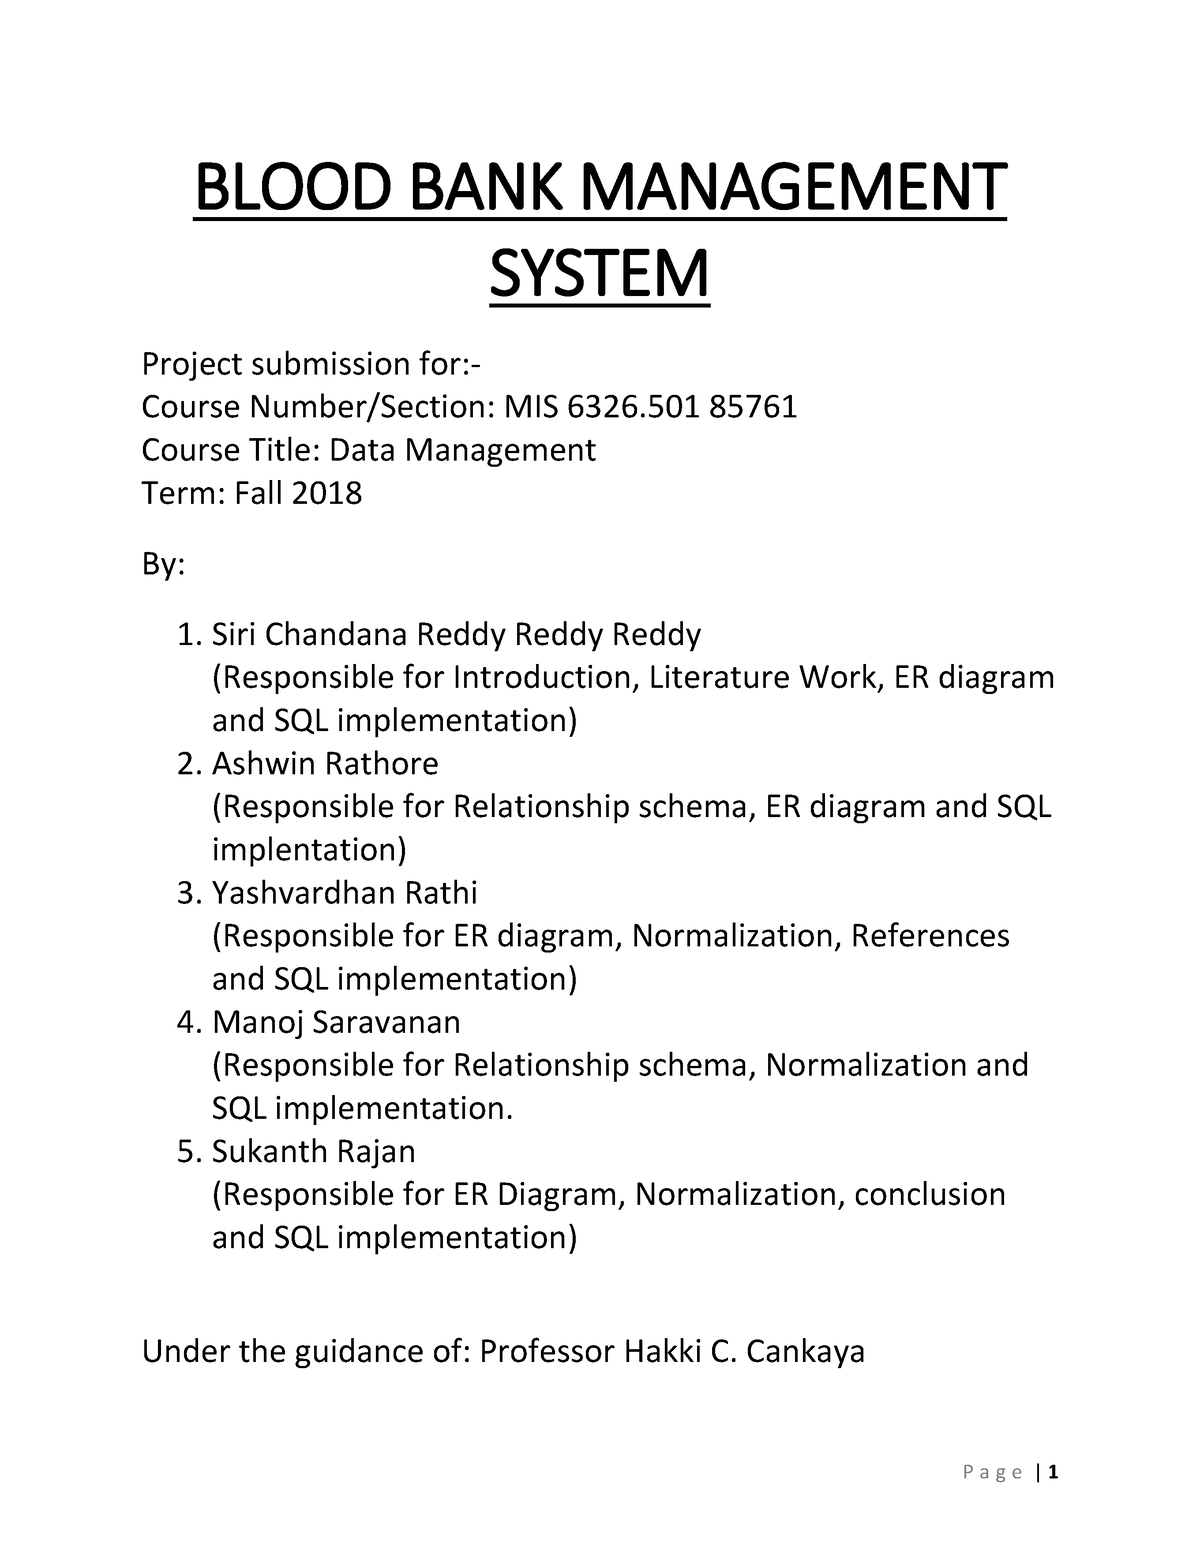 blood bank management system research paper